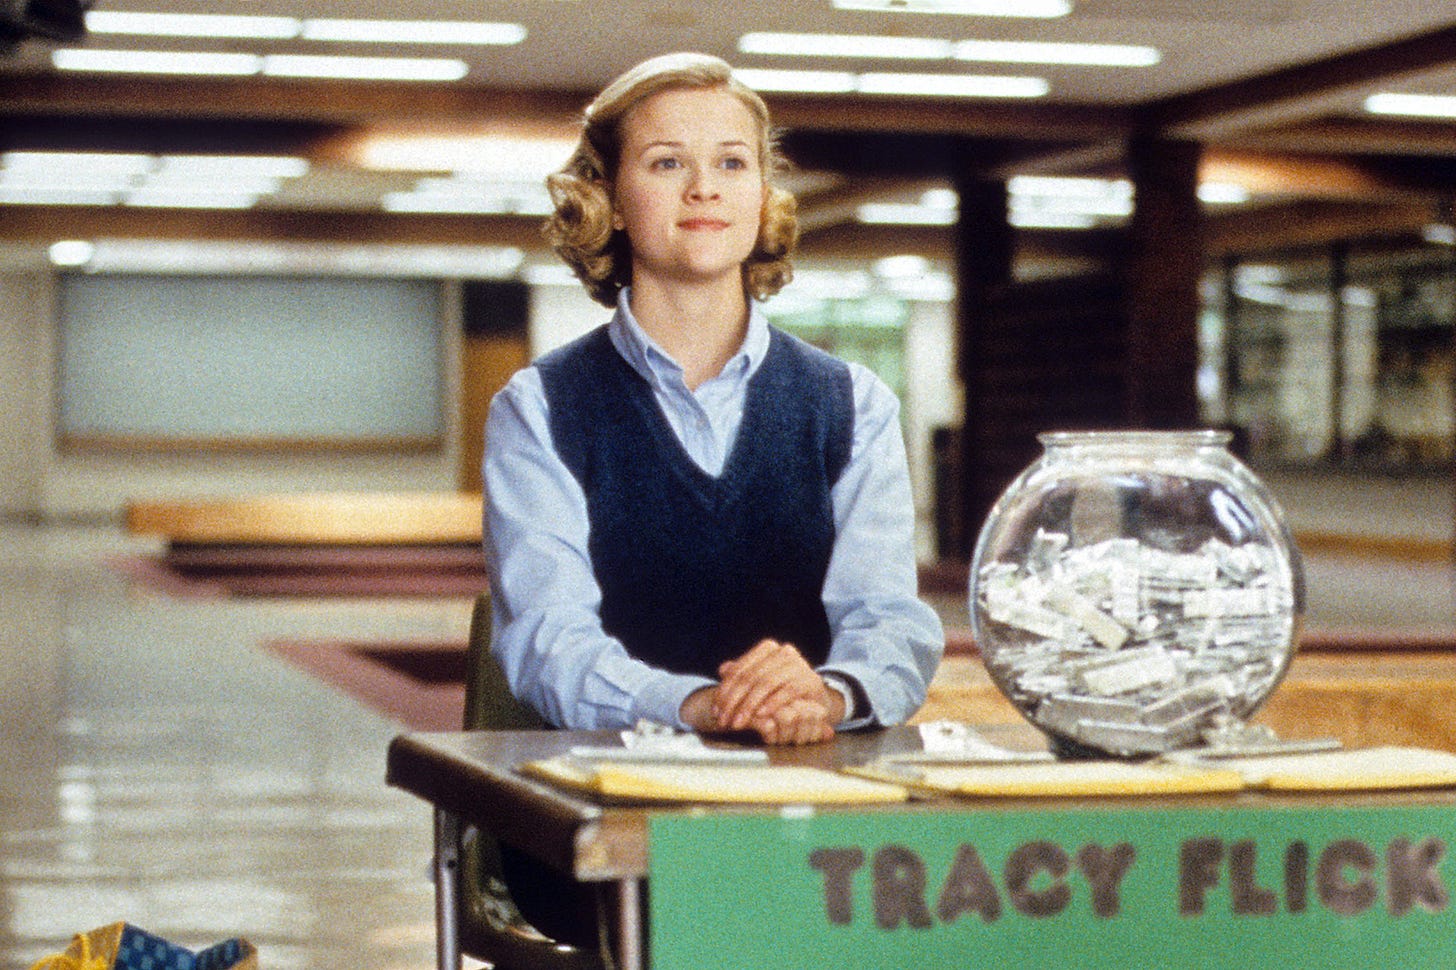 Reese Witherspoon returns to Election sequel as Tracy Flick | EW.com